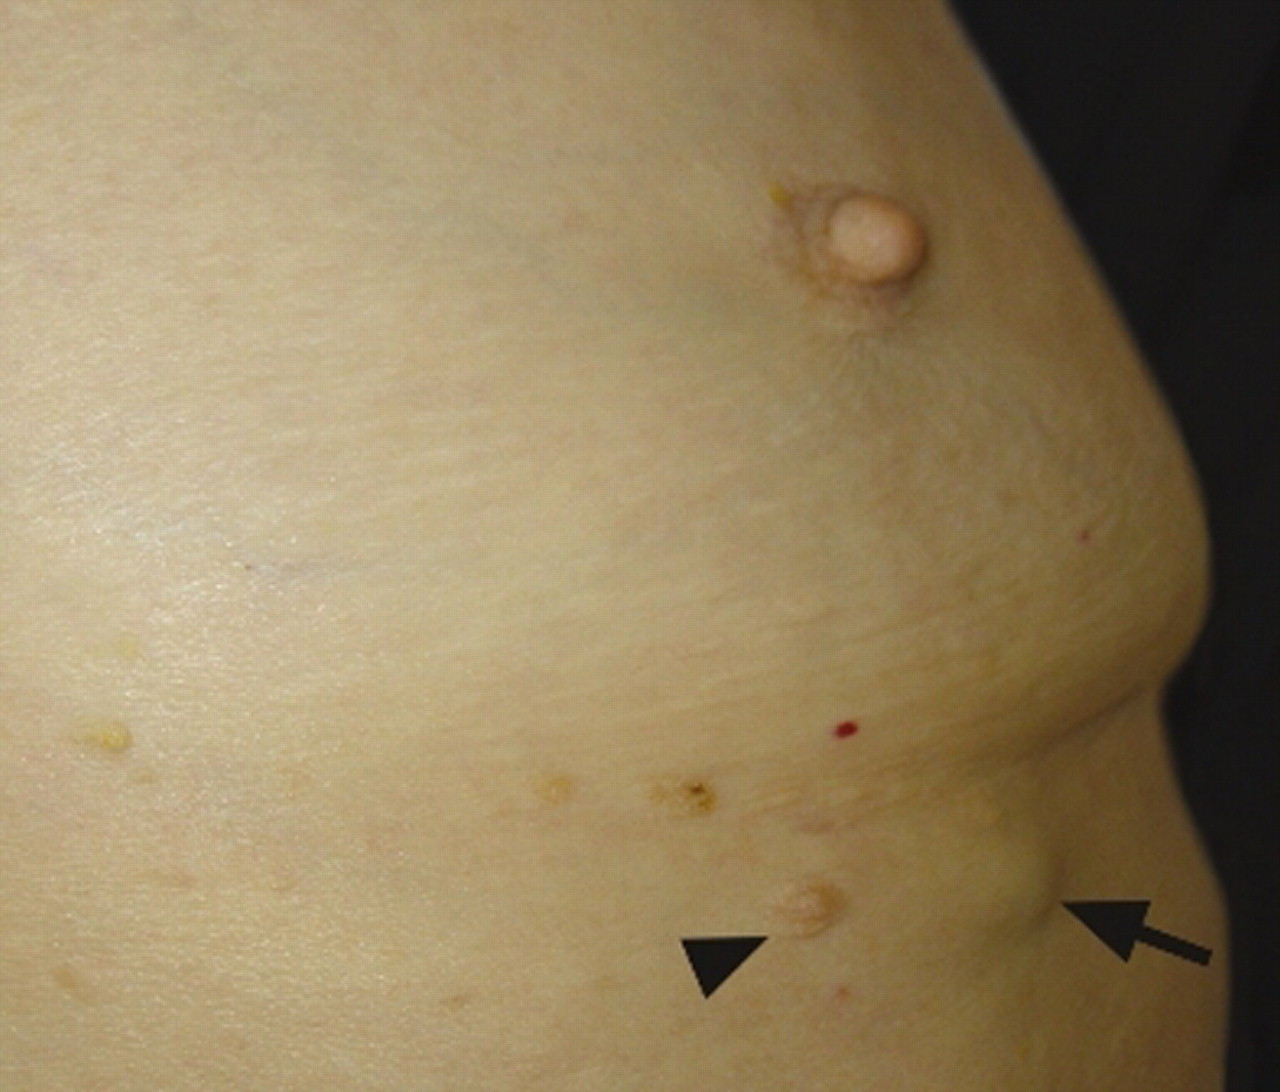 Breast cancer associated with an accessory nipple